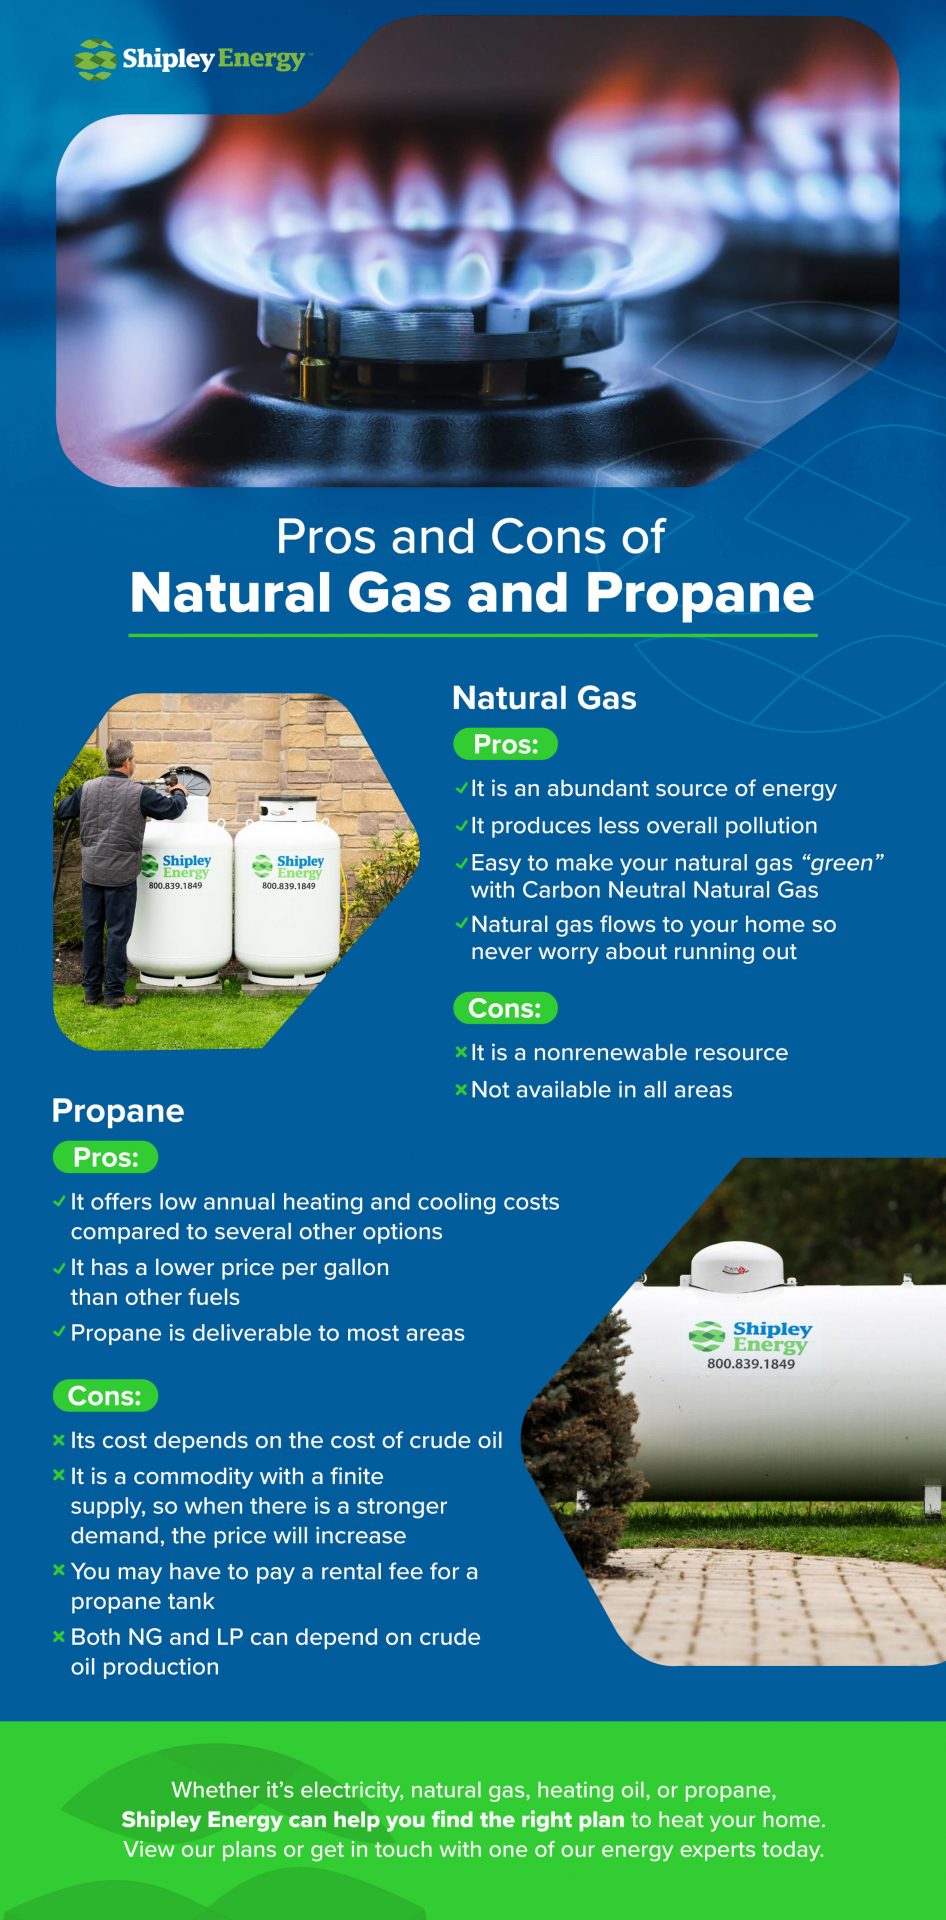 Natural gas vs. propane: Here's what you need to know - Reviewed